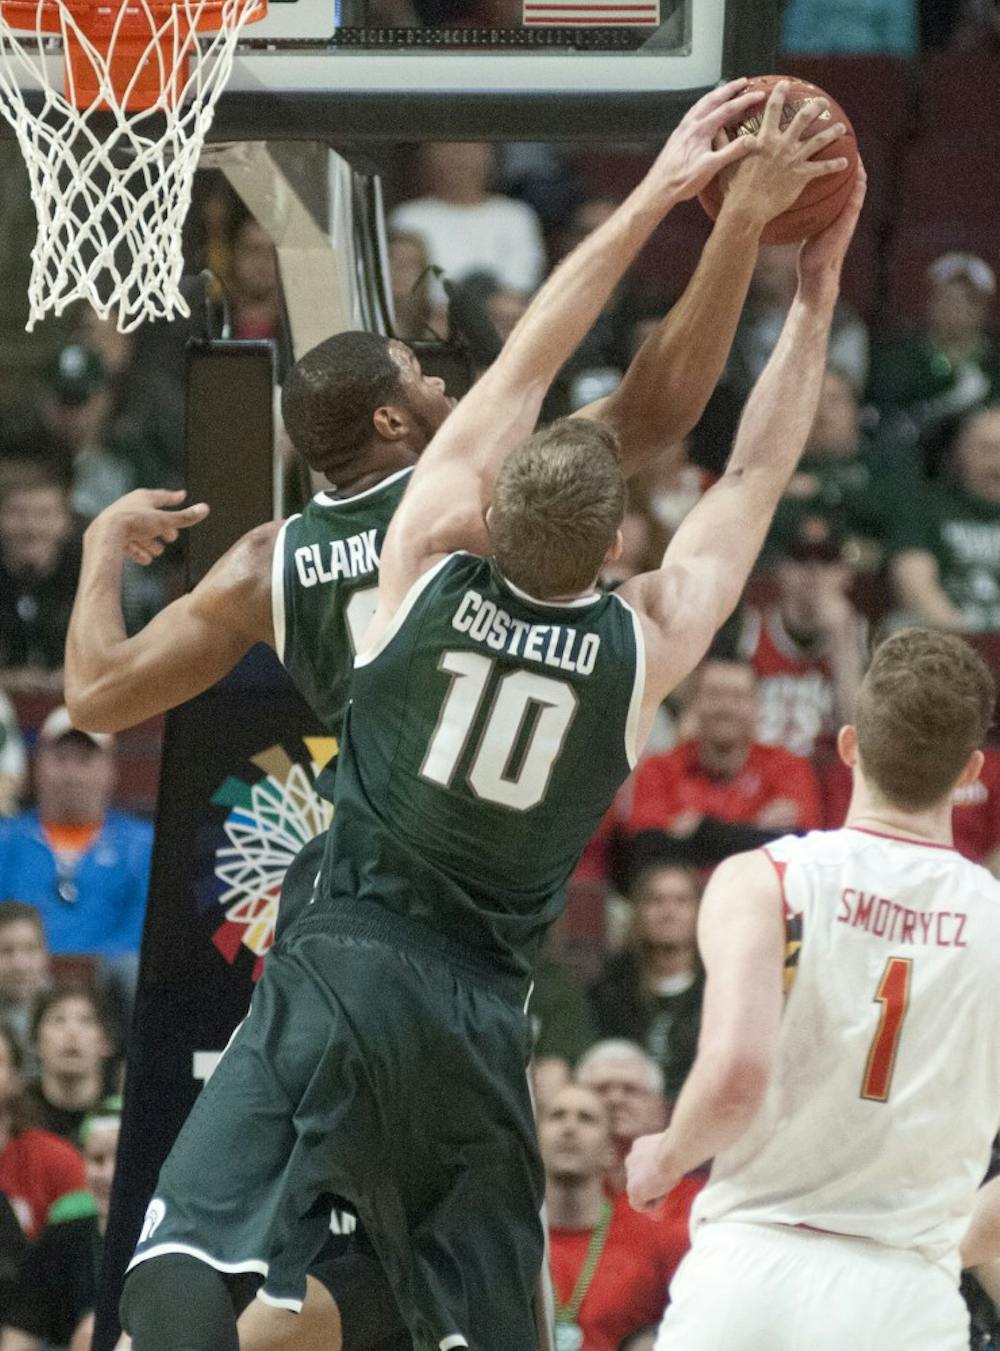 <p>Freshman forward Marvin Clark Jr. and junior forward Matt Costello jump for a rebound Mar. 14, 2015, during the game against Maryland at the Big Ten Tournament at United Center in Chicago. The Spartans defeated the Terrapins, 62-58. Kelsey Feldpausch/The State News</p>